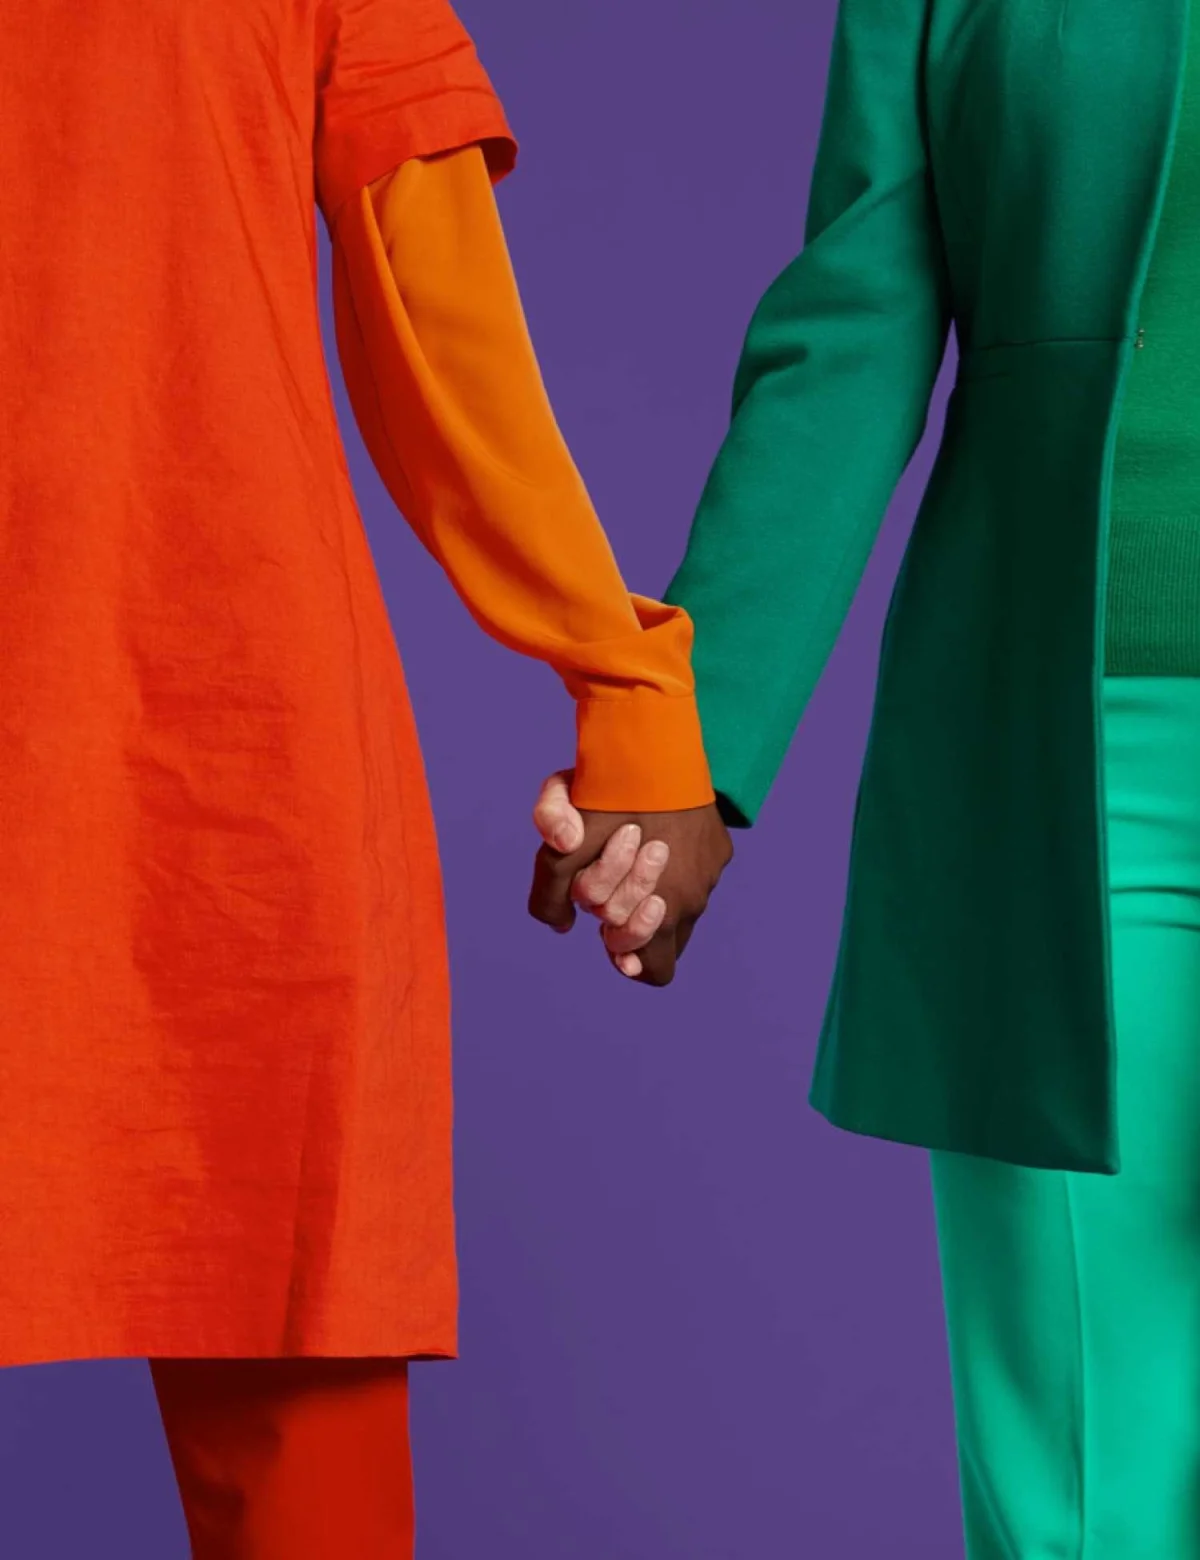 Two people wearing orange and green clothing holding hands in a purple background.